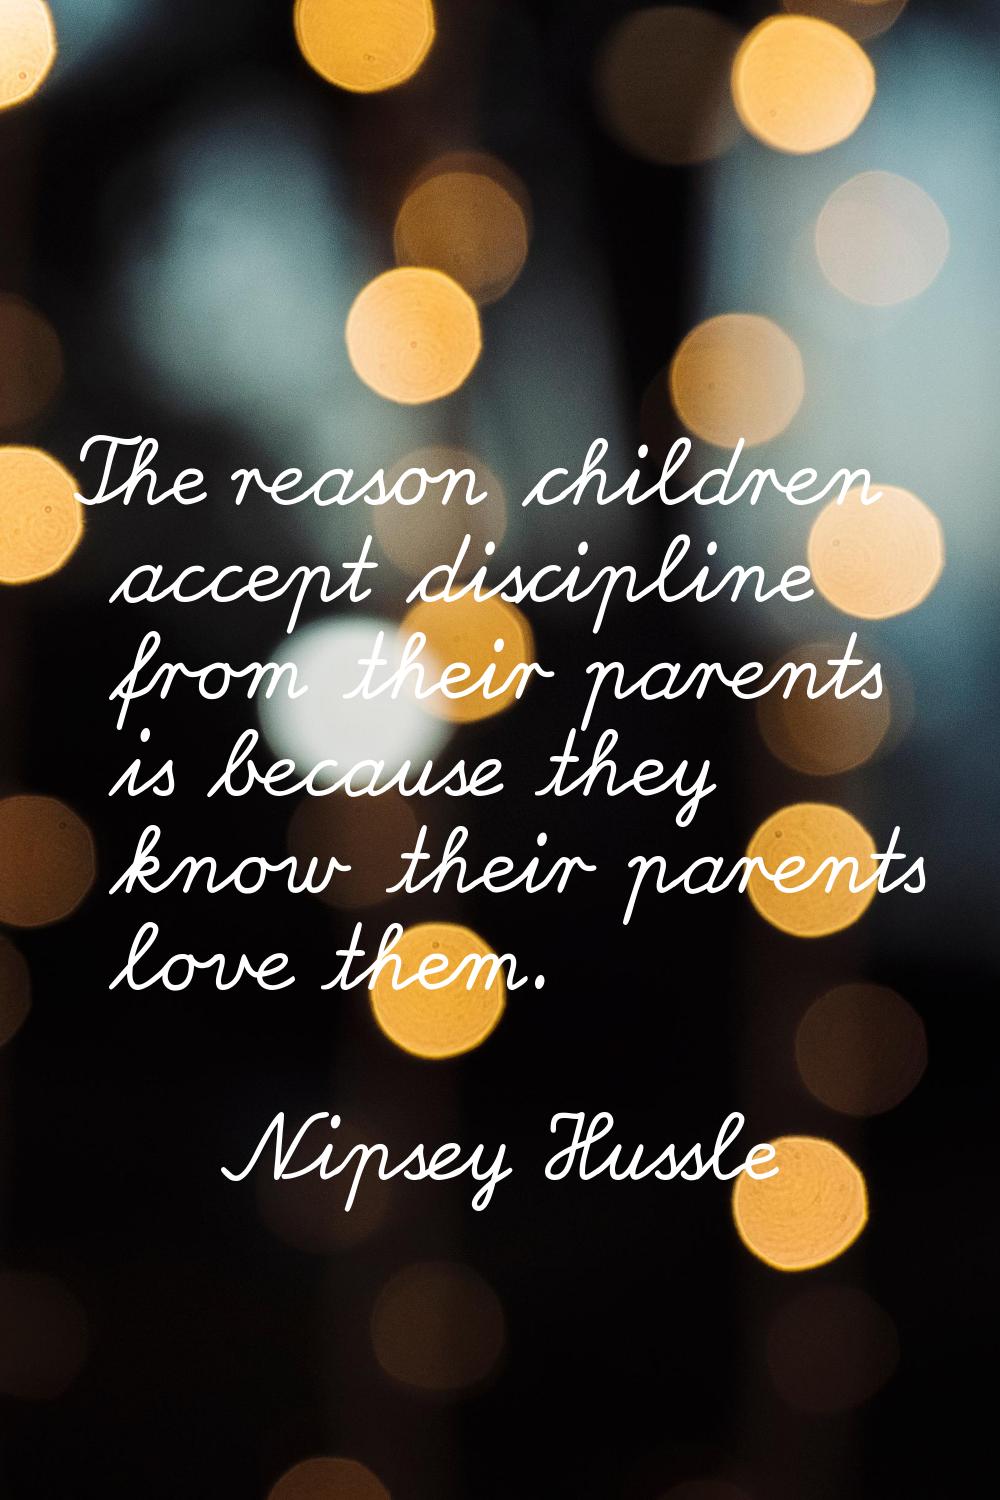 The reason children accept discipline from their parents is because they know their parents love th